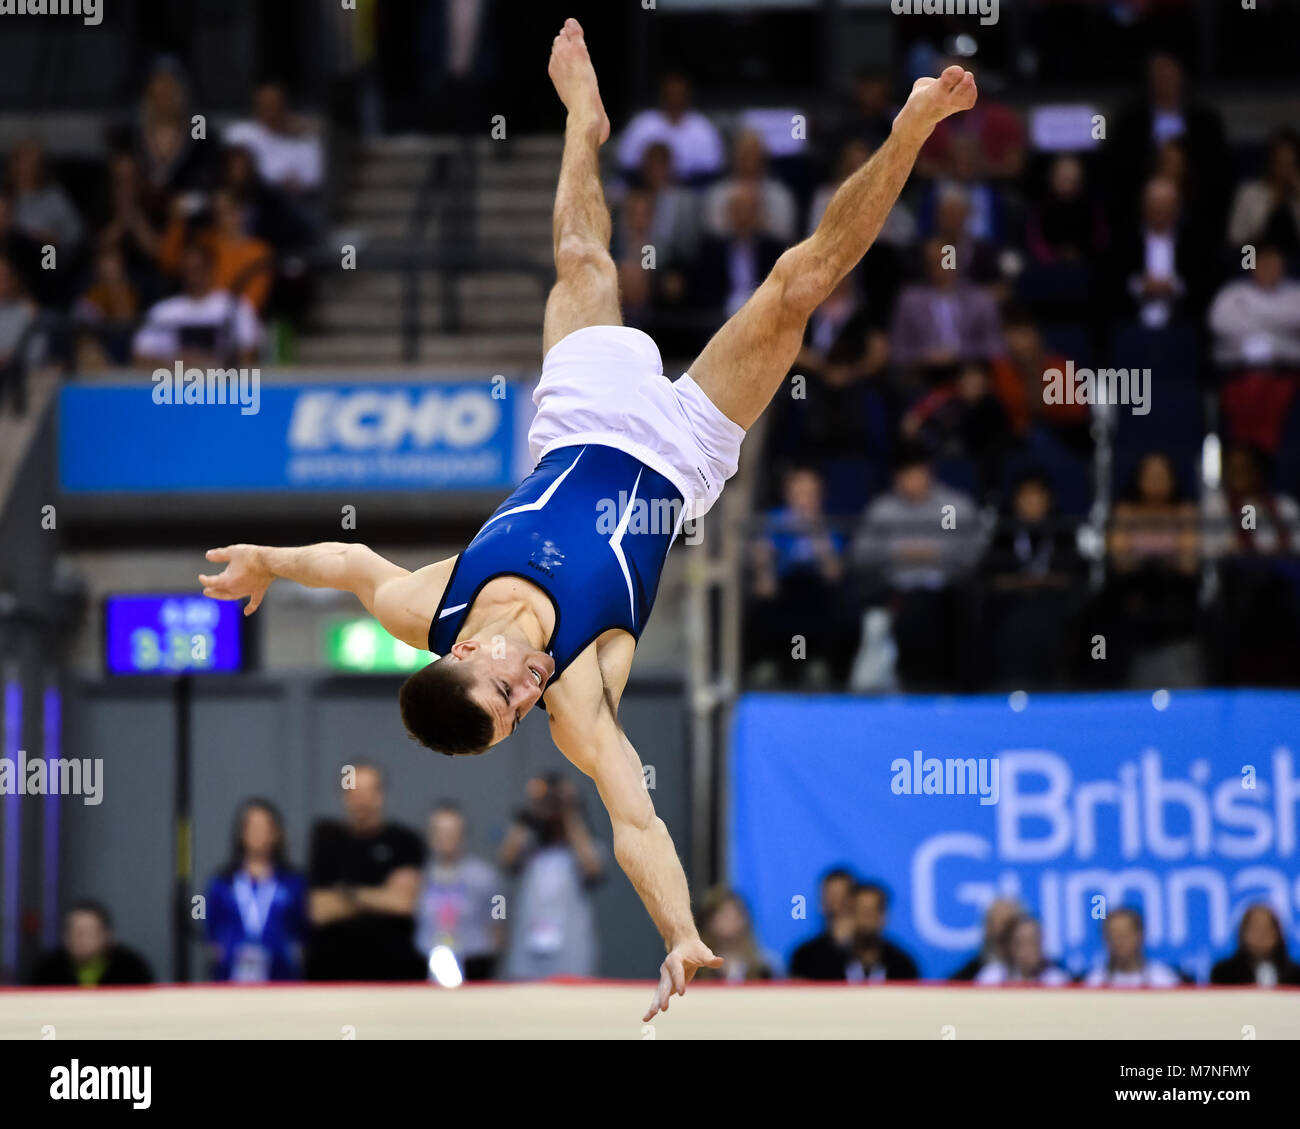 Echo Arena, Liverpool, UK. 11th Mar, 2018. Max Whitlock competes on the Men's Floor Exercise during the WAG Senior Apparatus Final/MAG Masters of the 2018 Gymnastics British Championships at Echo Arena on Sunday, 11 March 2018. LIVERPOOL ENGLAND. Credit: Taka G Wu Credit: Taka Wu/Alamy Live News Stock Photo